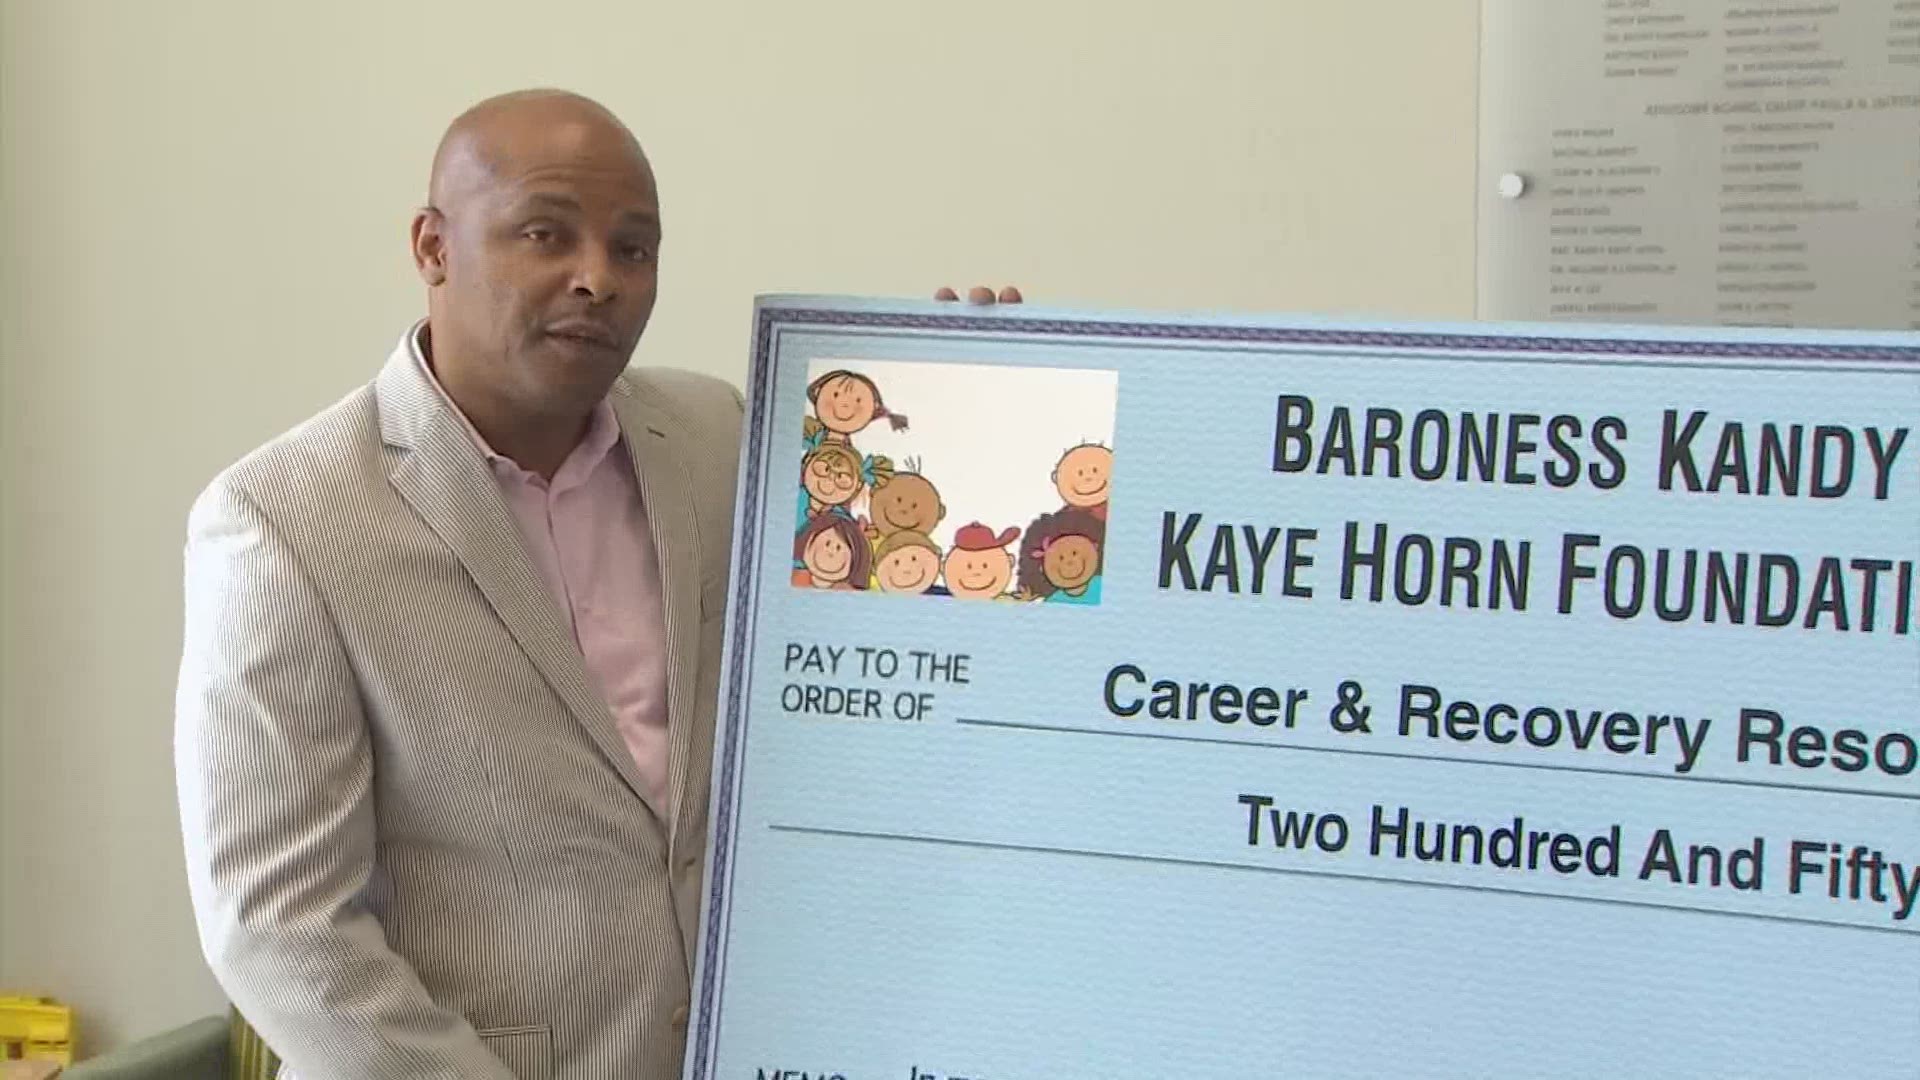 For the onth of June, Baroness Kandy Kaye Horn Foundation is surprising nonprofits in Houston with nearly $1 million in donations.